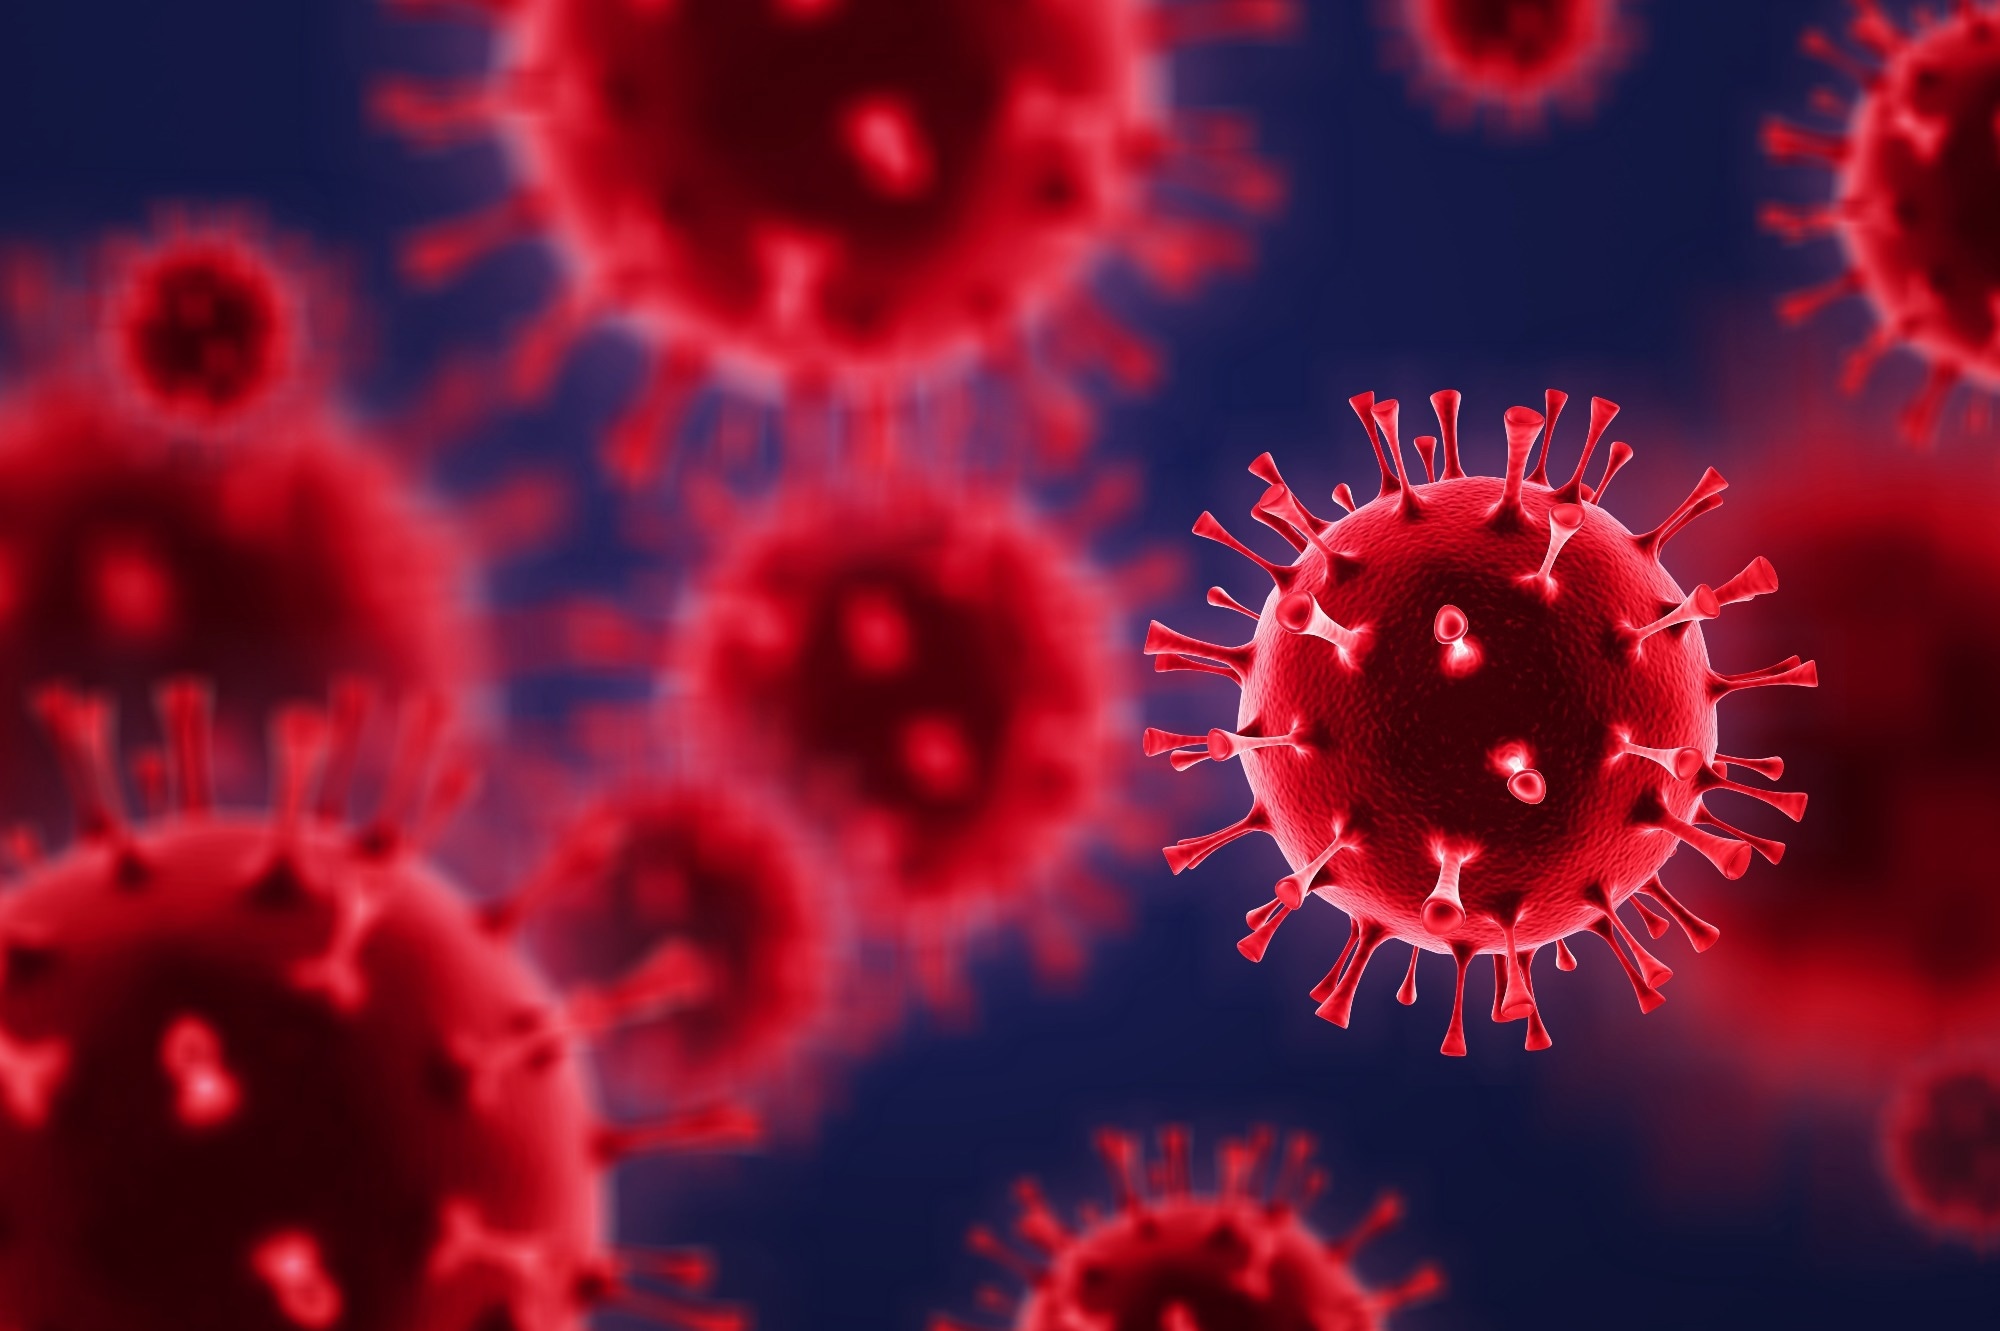 Study: Systematic review and meta-analysis of the factors affecting waning of post-vaccination neutralizing antibody responses against SARS-CoV-2. Image Credit: Billion Photos/Shutterstock.com